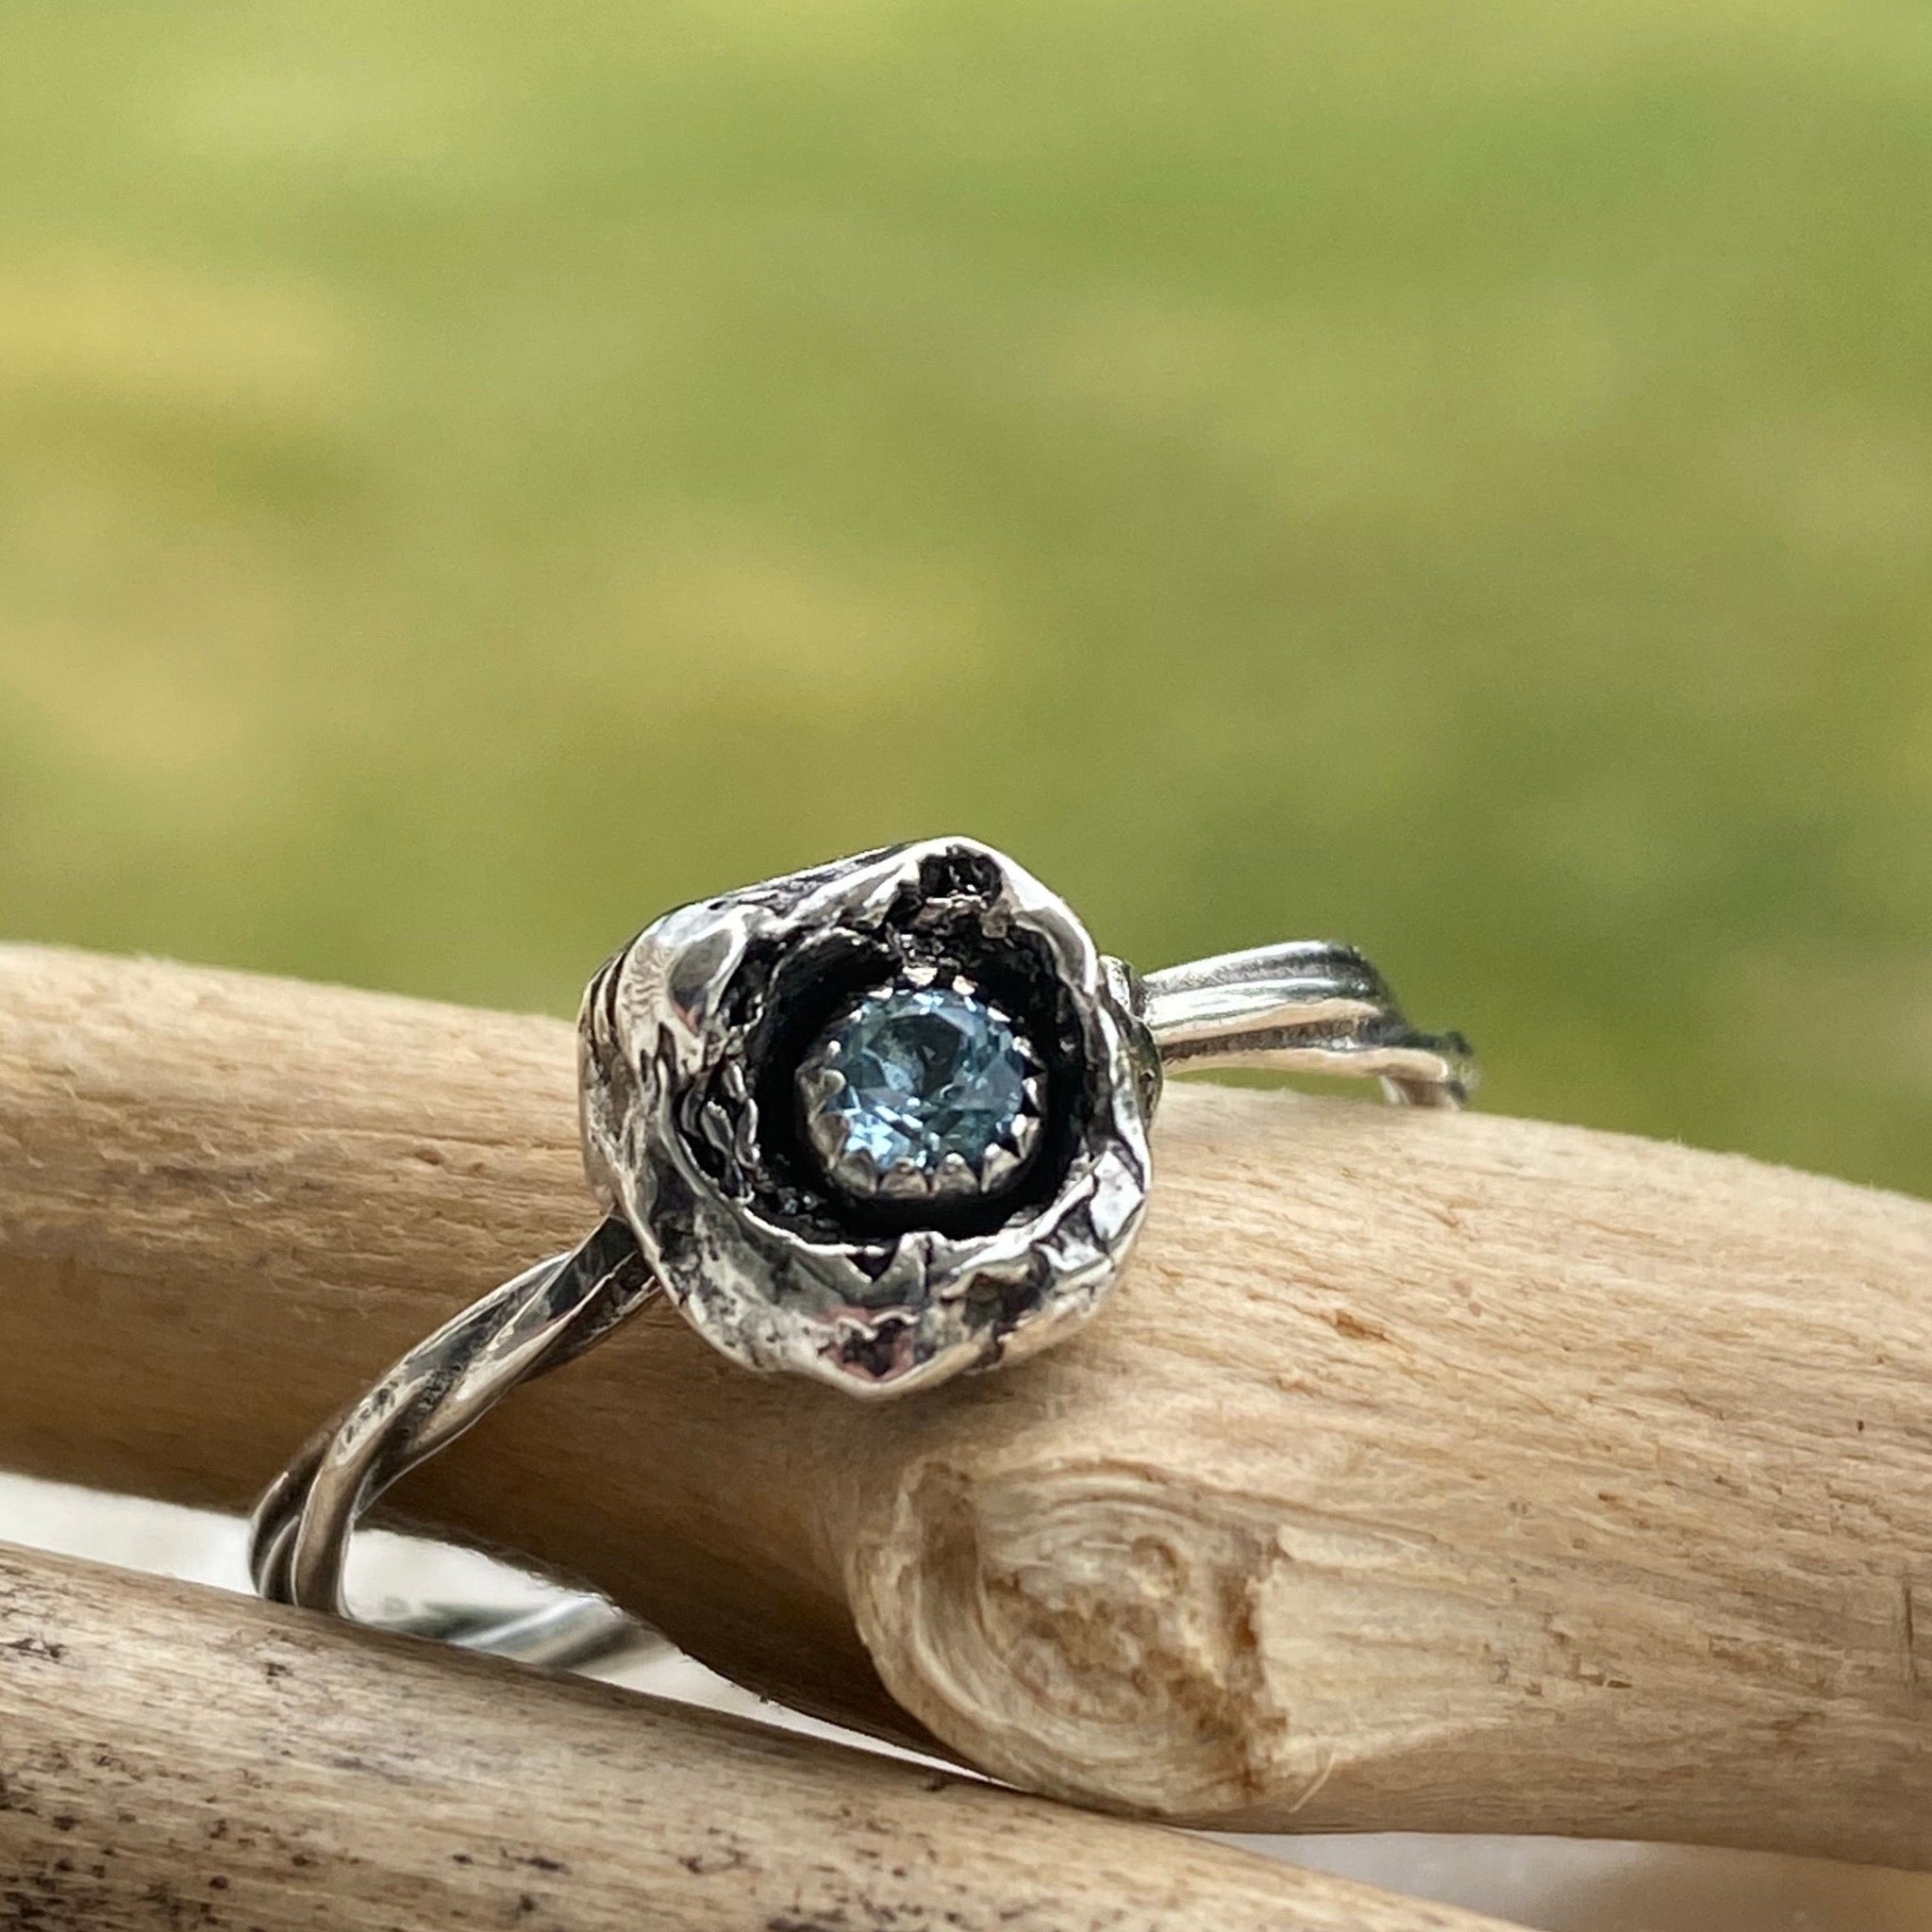 The organic nature this is ring makes it a one of a kind.  Made with a sparkly 3mm faceted Sky Blue Topaz and Sterling Silver, it can be worn by itself or stacked with other rings.  Size 8.5